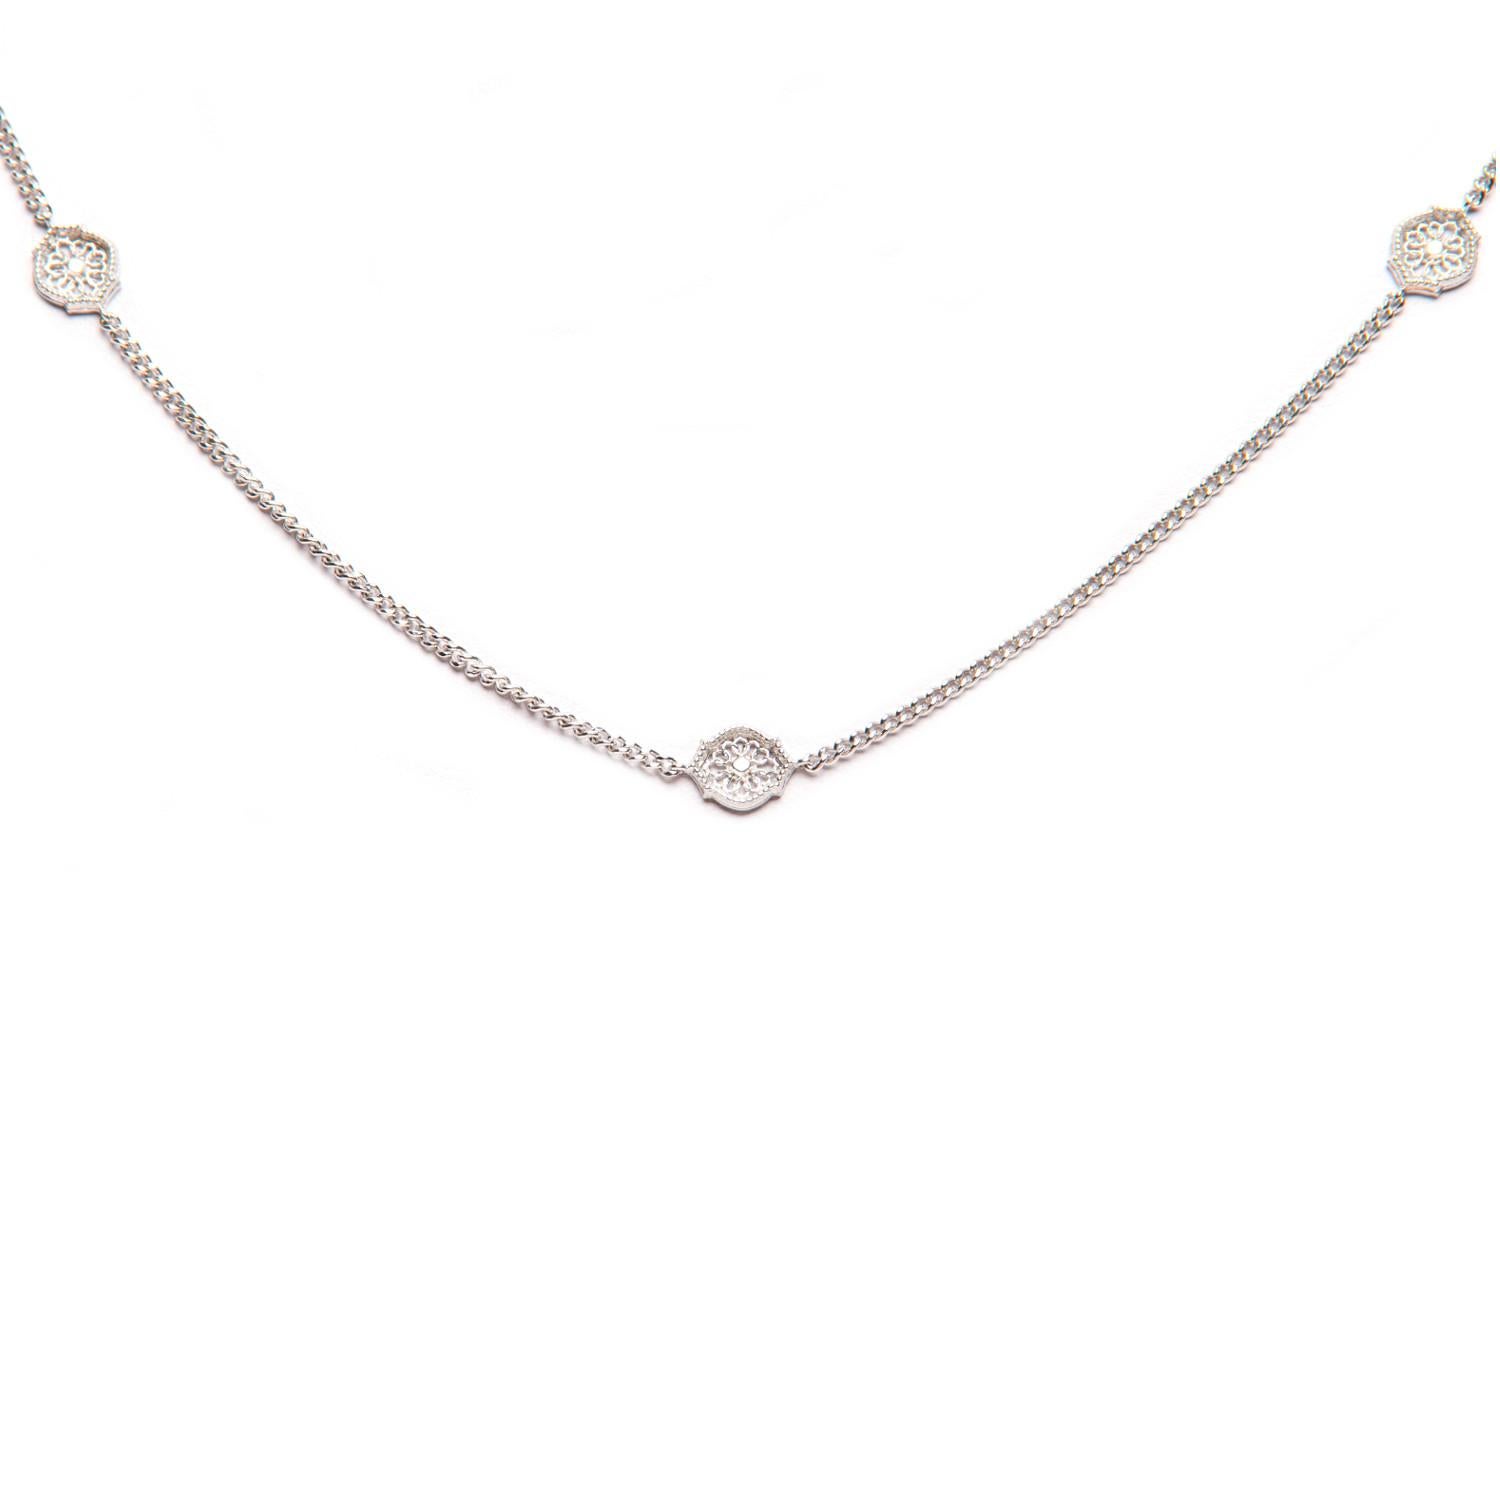 The ‘Mauresque’ Necklace by Natalie Barney features small Arabesque shape settings in a fine trace chain. It is a classical piece and comes with the matching stud earrings. Can be worn at both 42cm and 45cm.

Made in sterling silver. 

Inspired by a